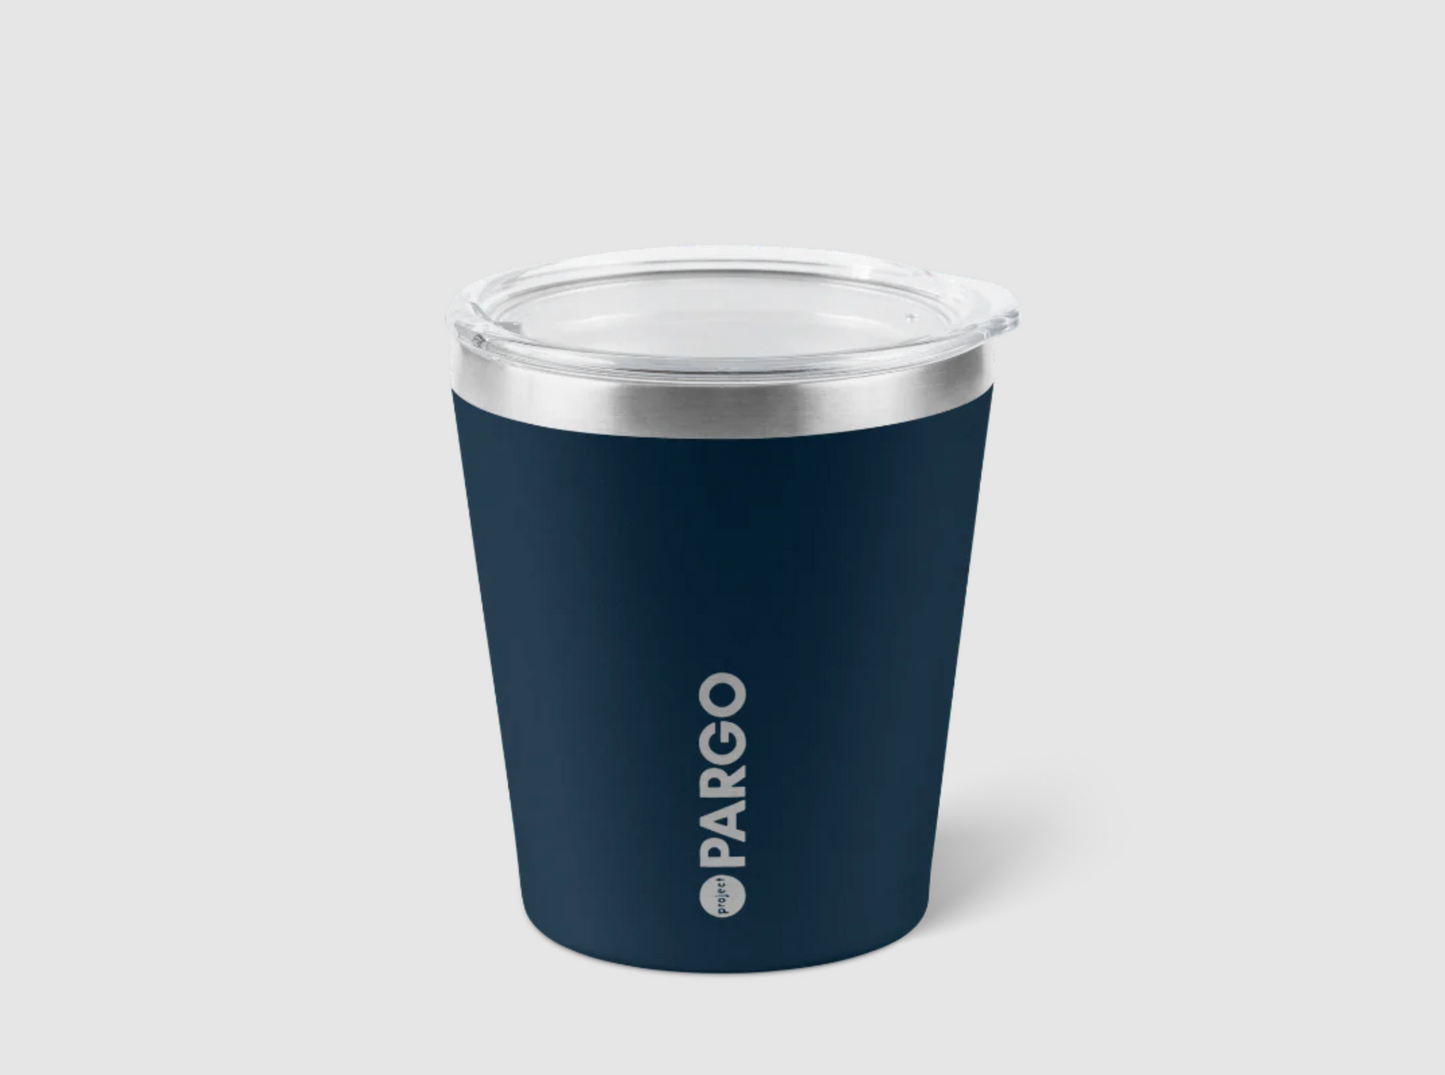 Project Pargo Insulated Coffee Cup 8oz